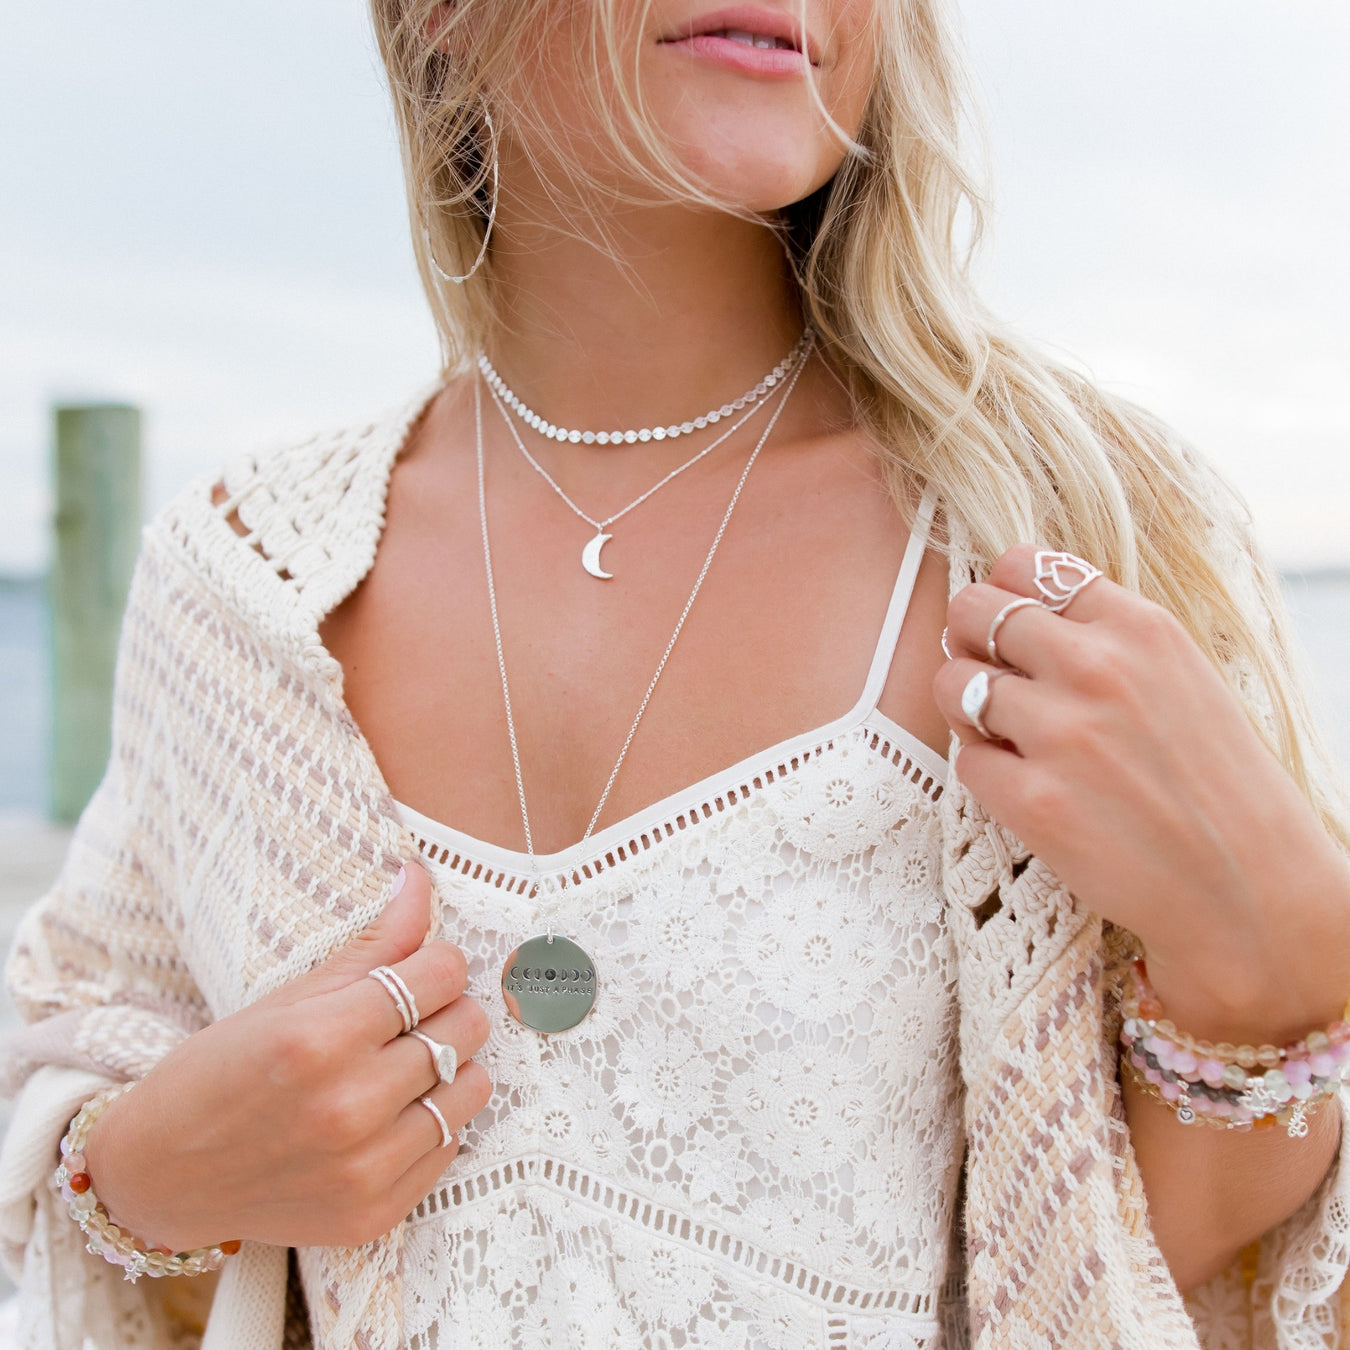 Blooming Lotus Jewelry - model wearing silver layering necklaces choker, crescent moon, mantra necklace on model wearing white lace dress